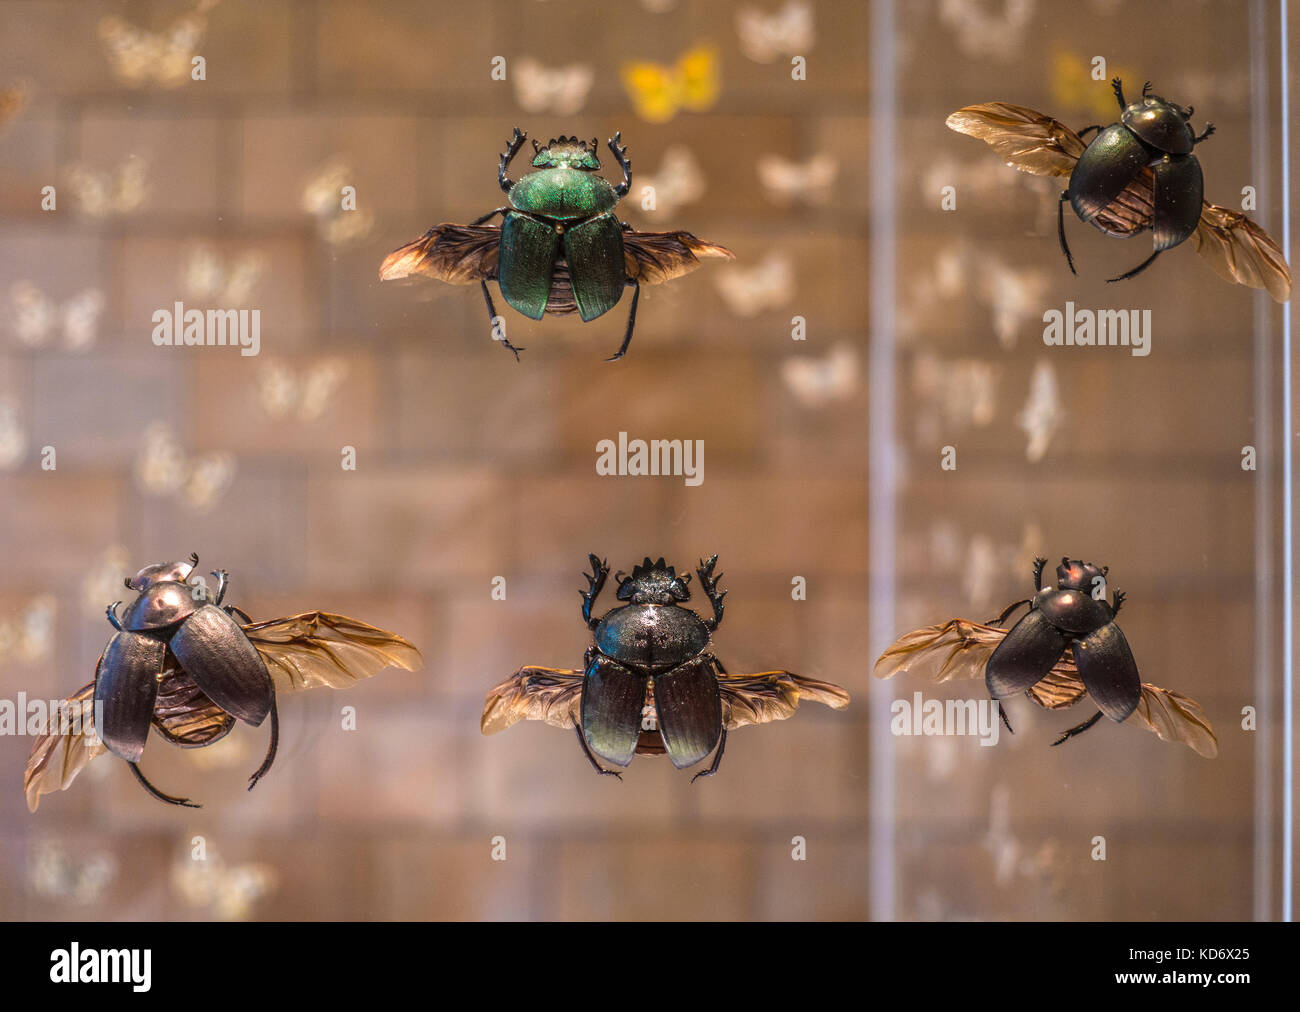 Large flying dor / dung beetles (including a green one) on display in a glass case at the Natural History Museum, Kensington, London, England, UK. Stock Photo